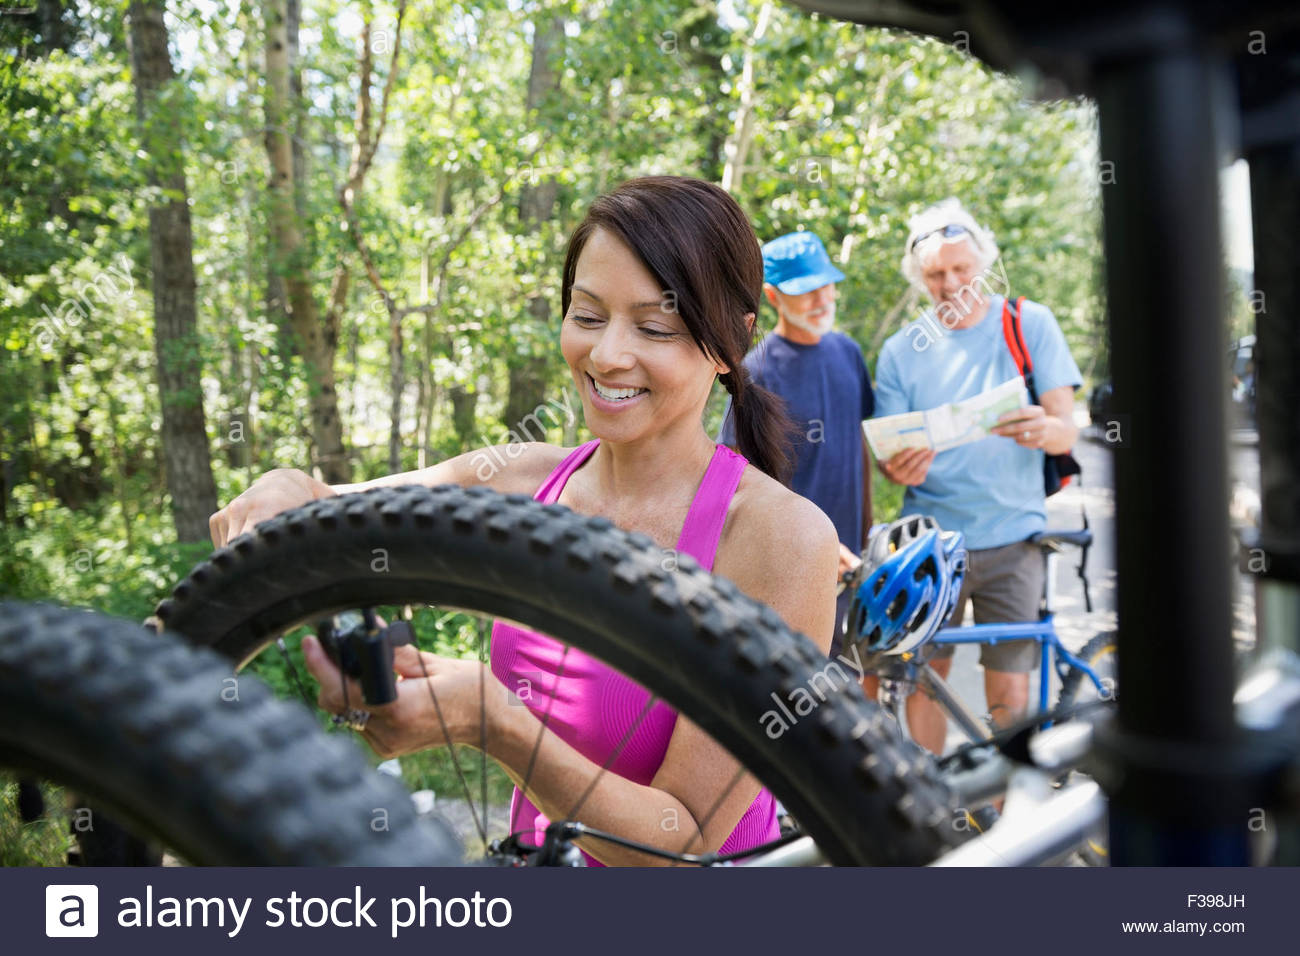 Smiling woman removing mountain bike from rack Stock Photo